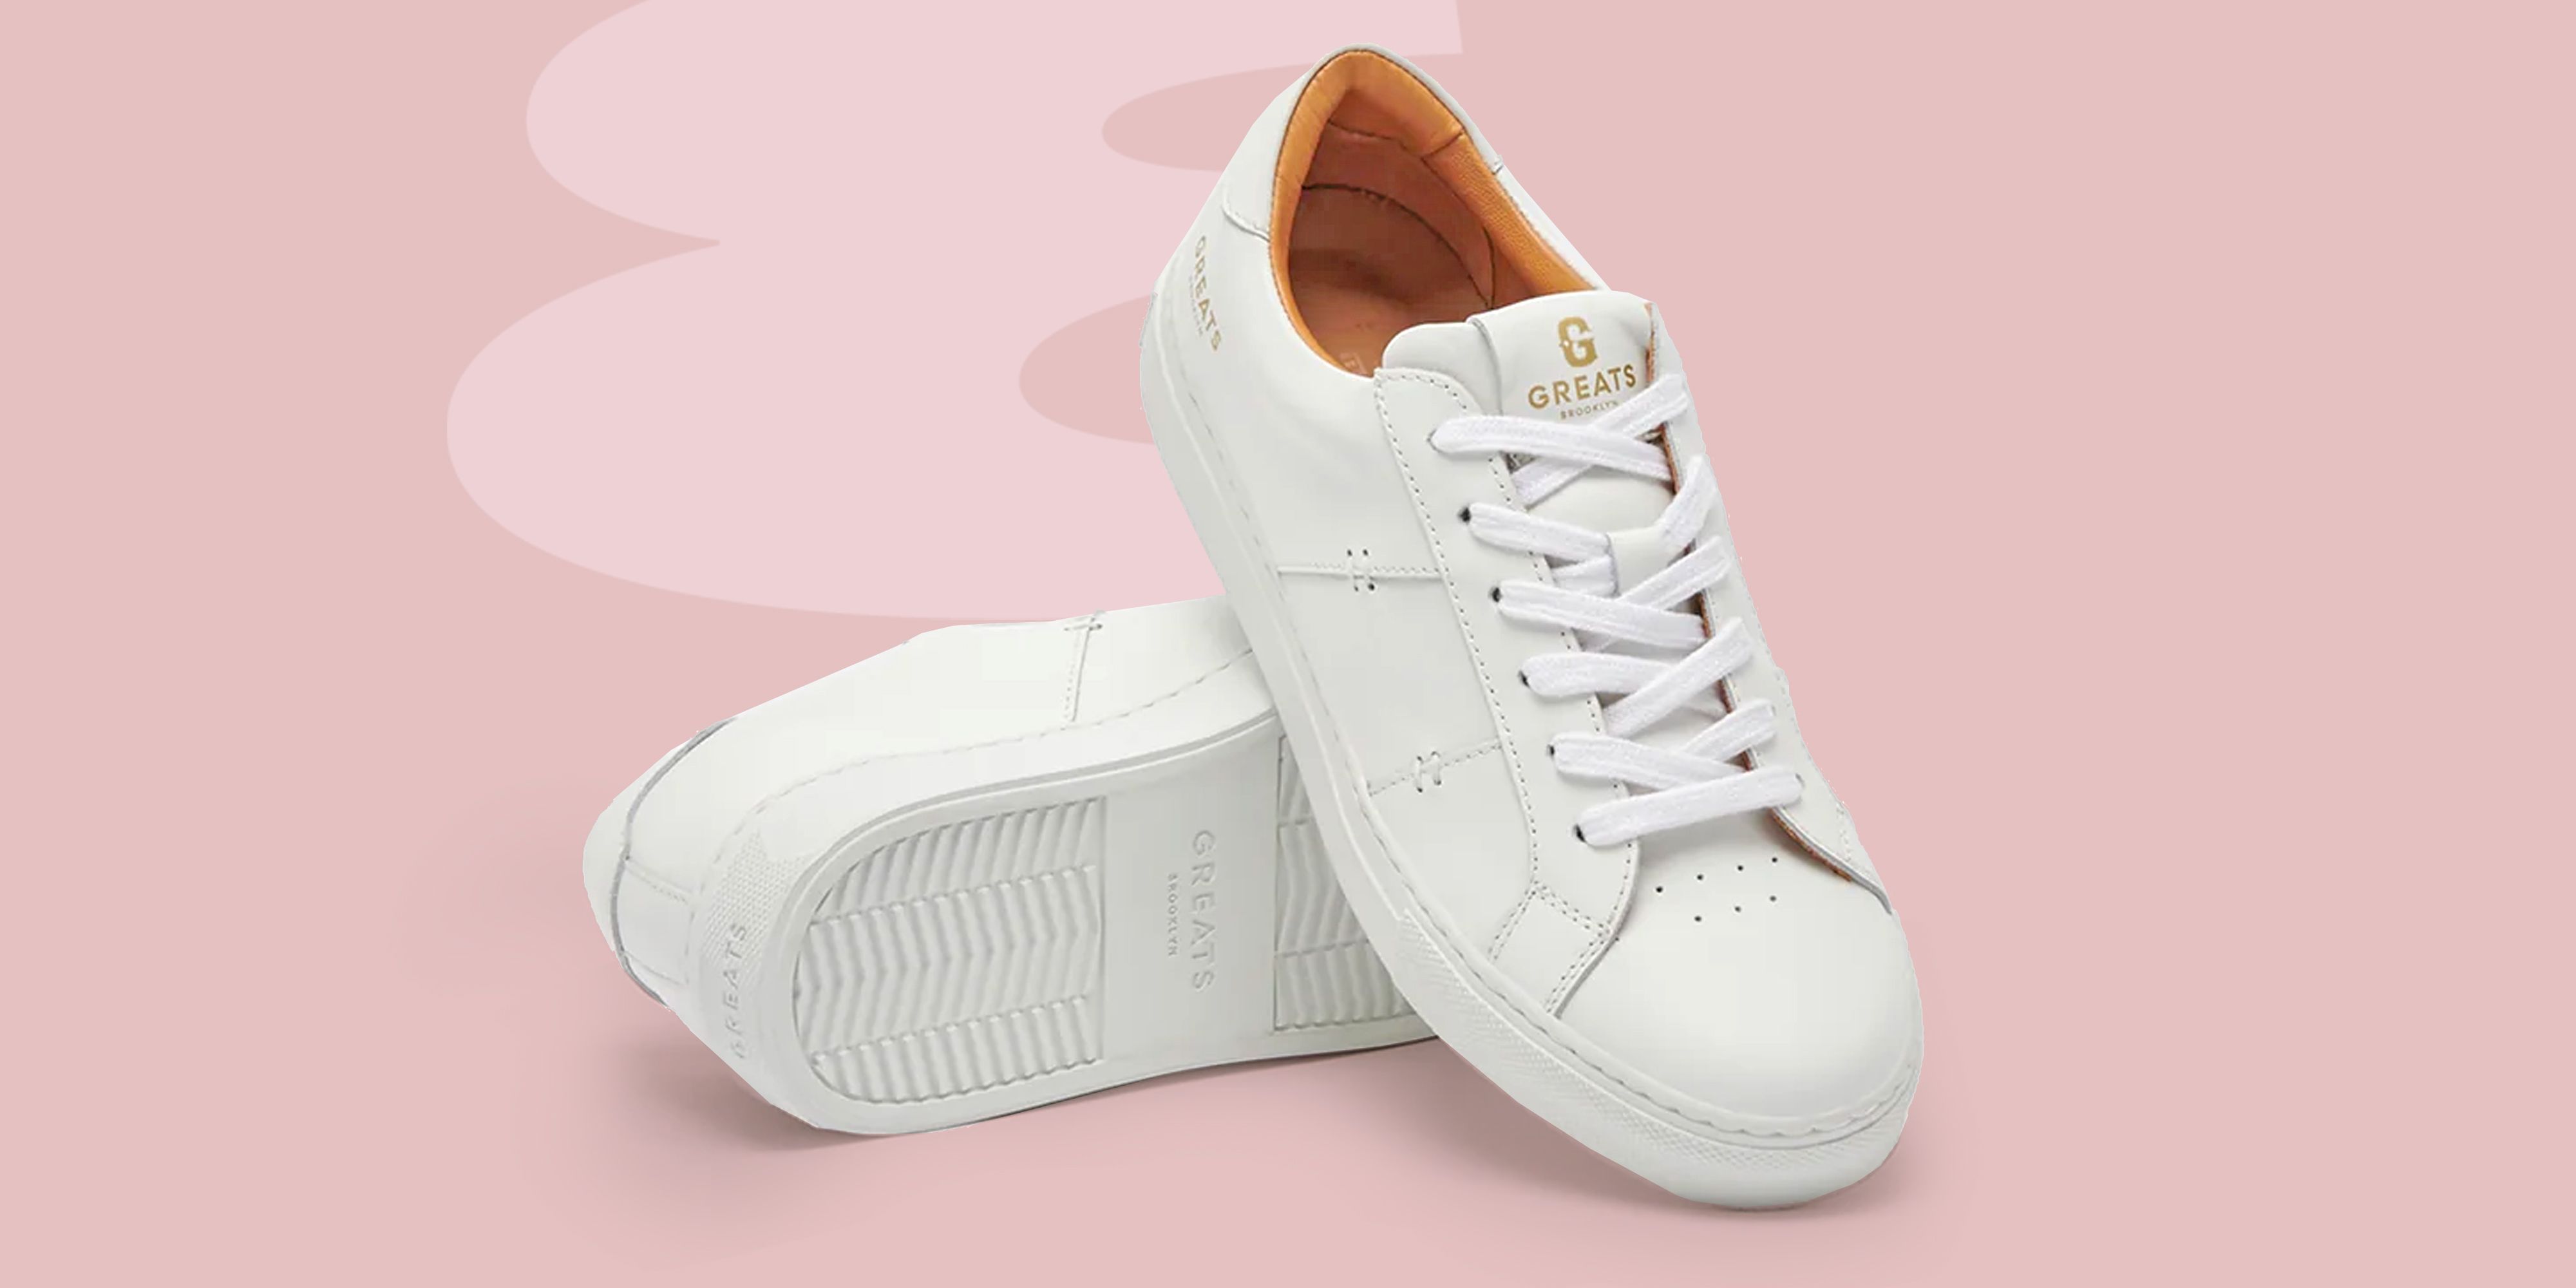 White-rimmed sneakers are taking over our streets